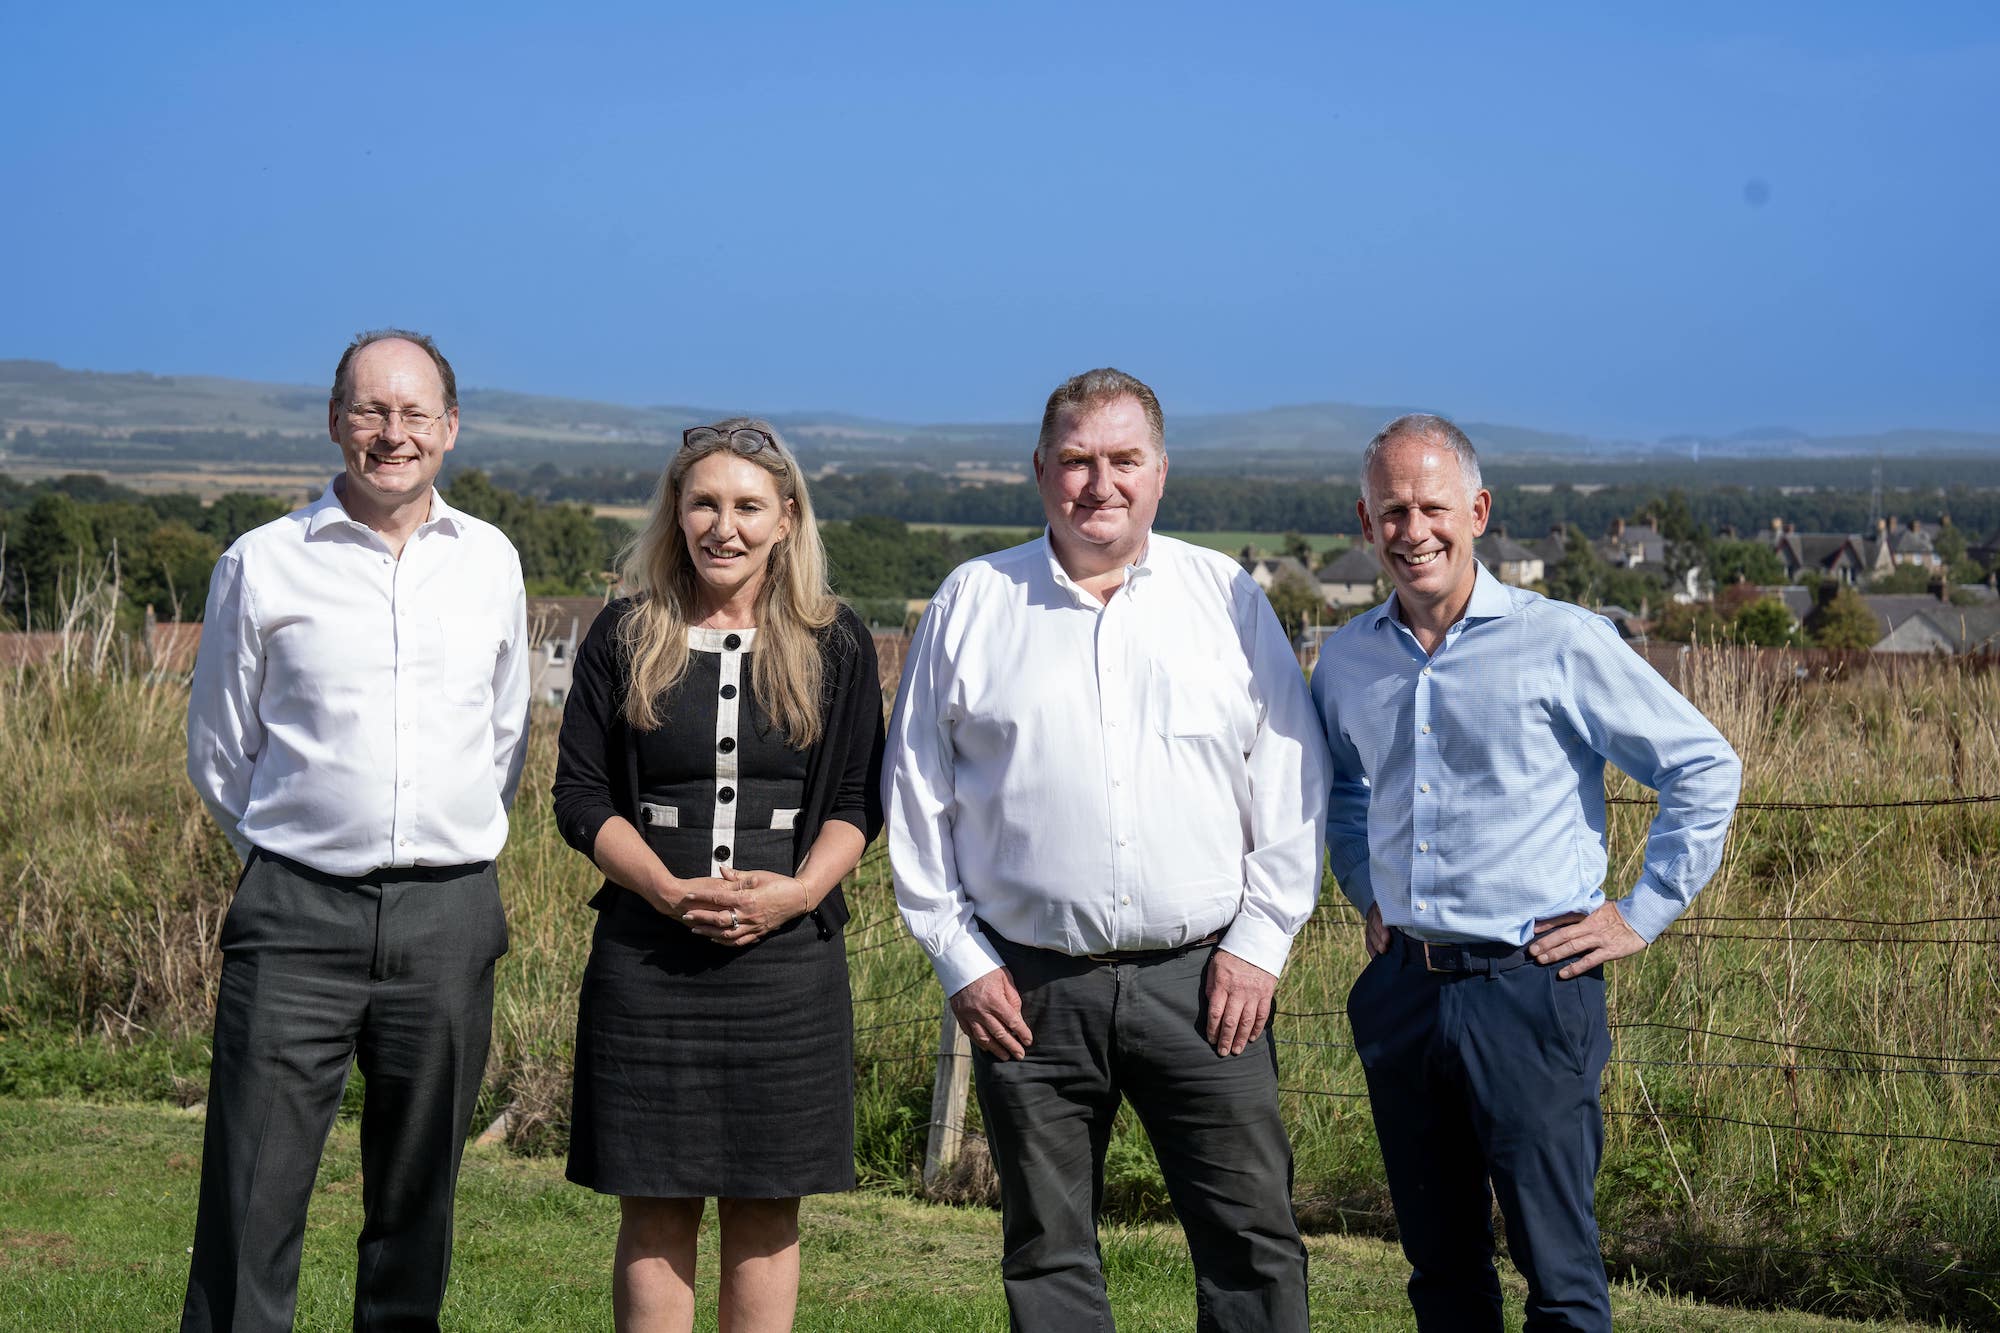 SWI's global whisky HQ and one of largest whisky collections set to come to Scotland